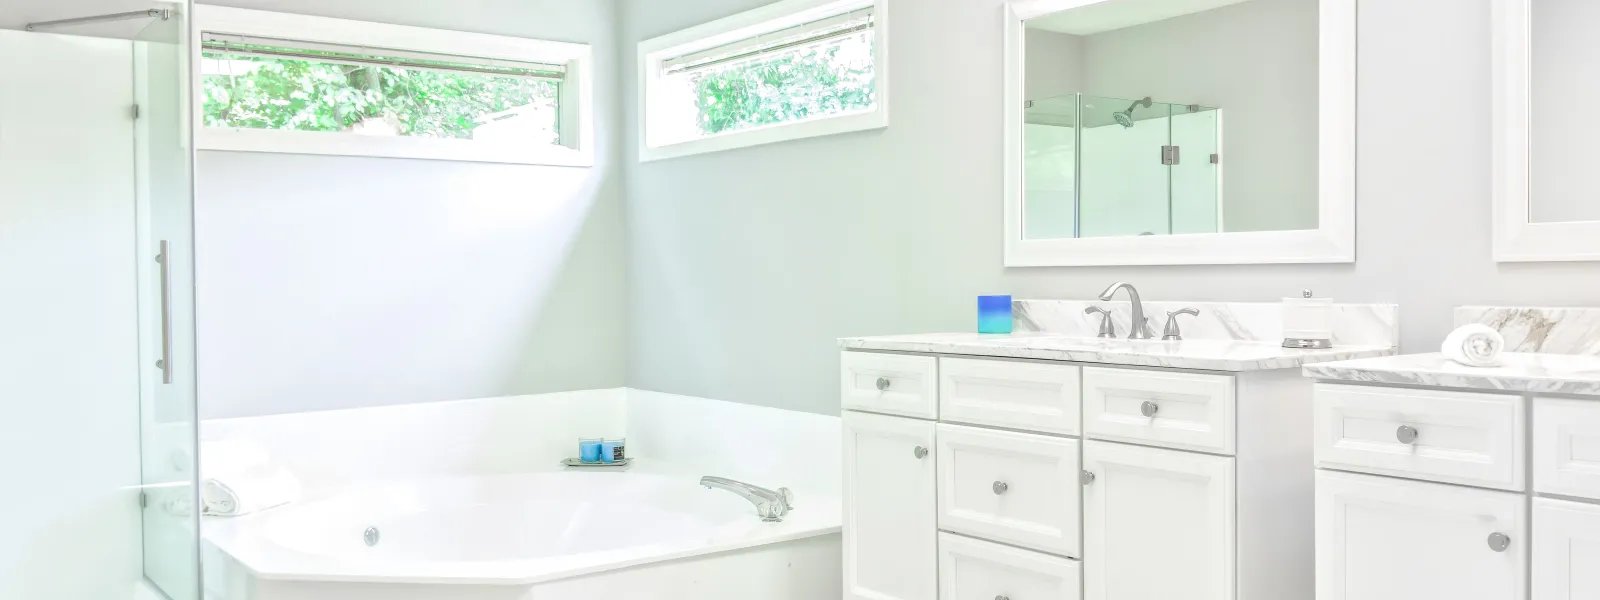 How to Remodel a Bathroom on a Budget